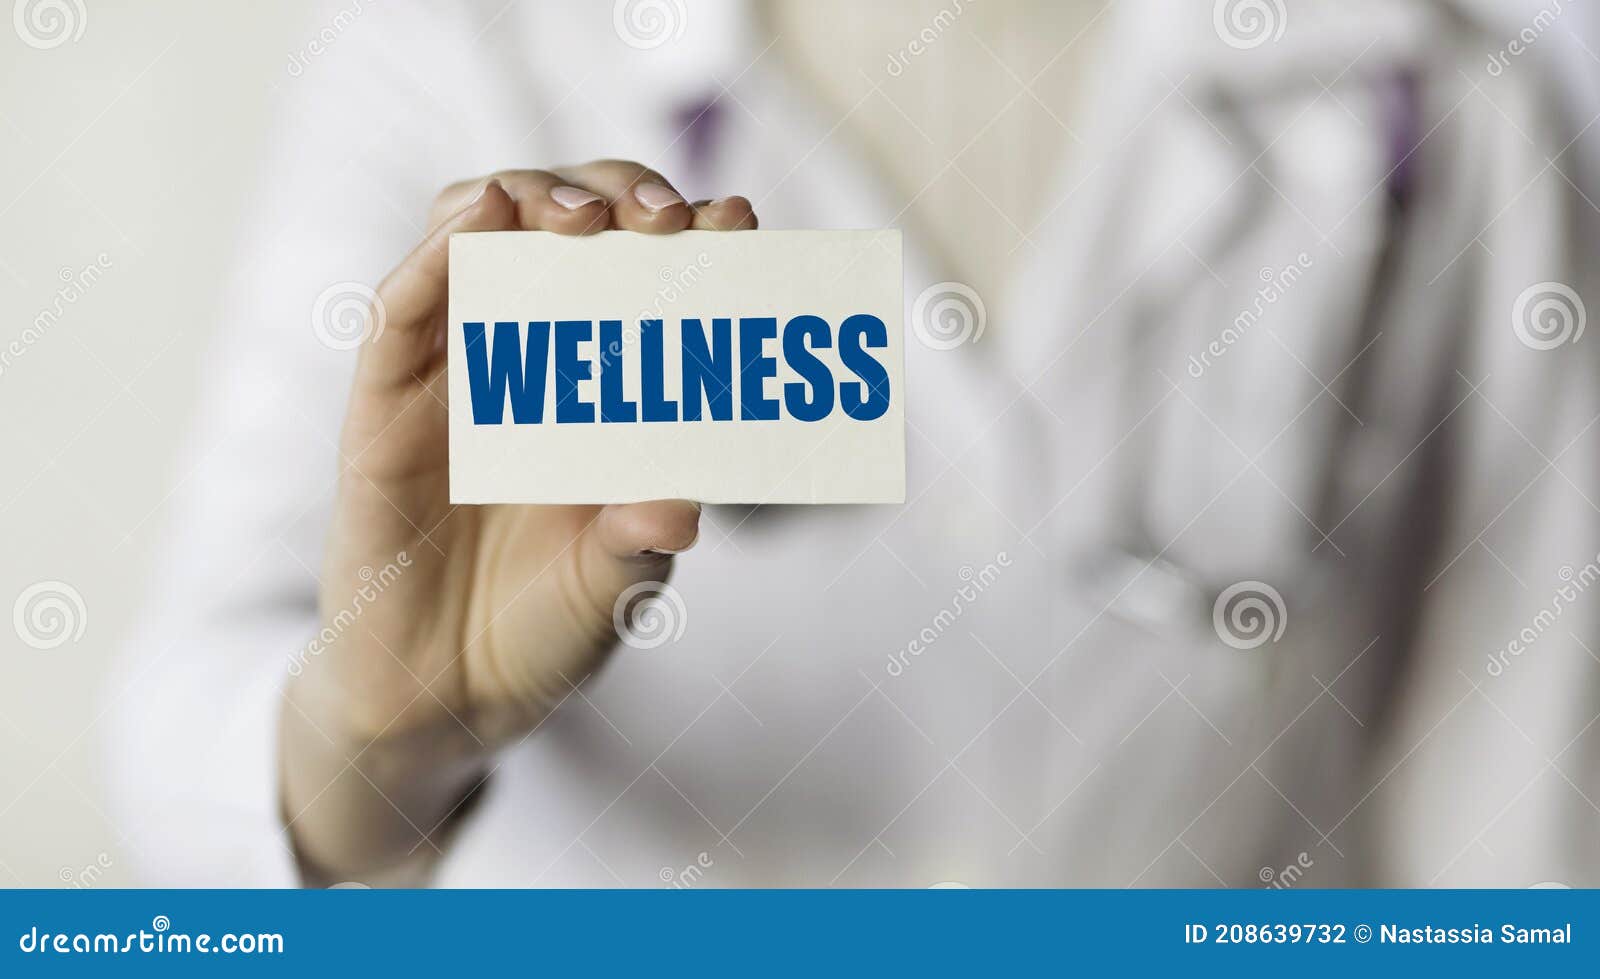 WELLNESS. Card with Text in Hand Medical Doctor Stock Photo - Image of doctor, wellbeing: 208639732